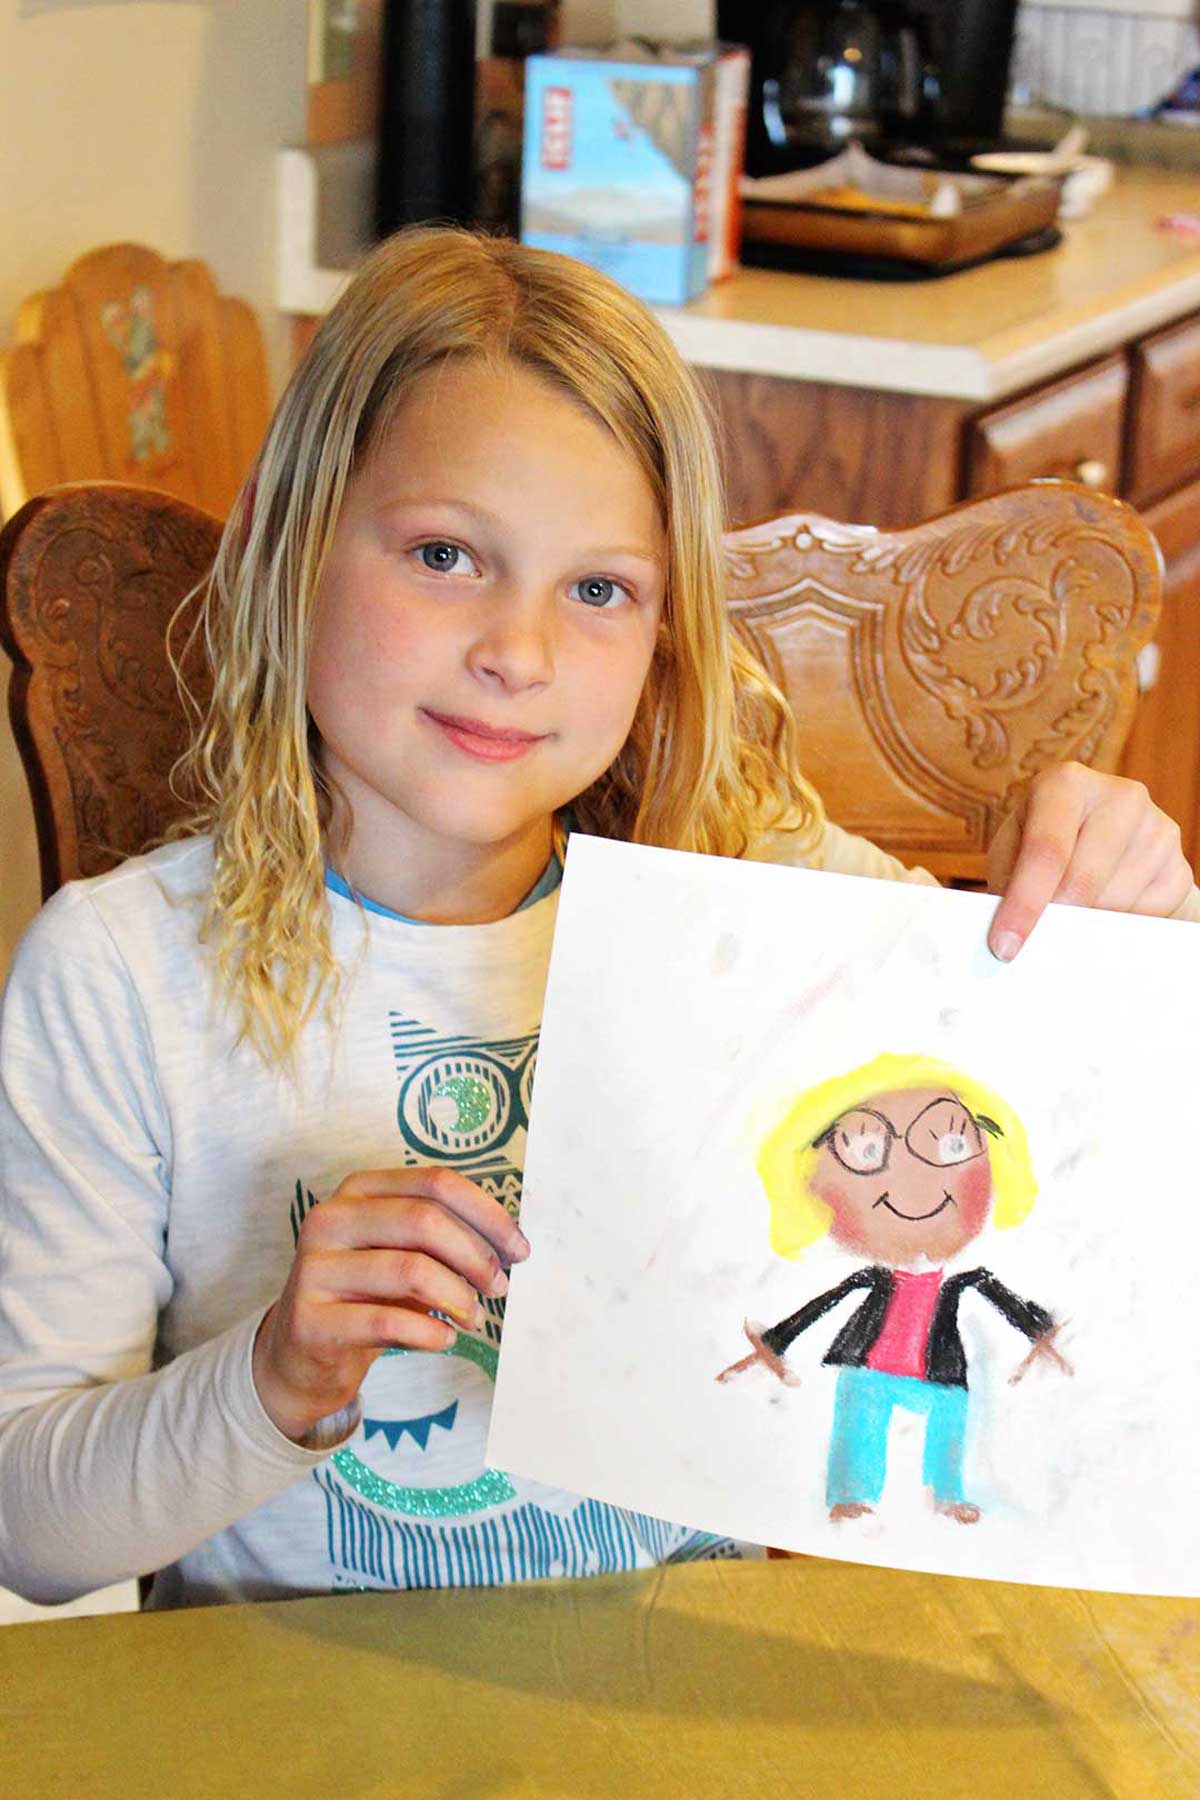 Young girl with blonde hair sits at a kitchen table holding up her drawing of a girl with blonde hair and glasses with blue pants and a black blazer.